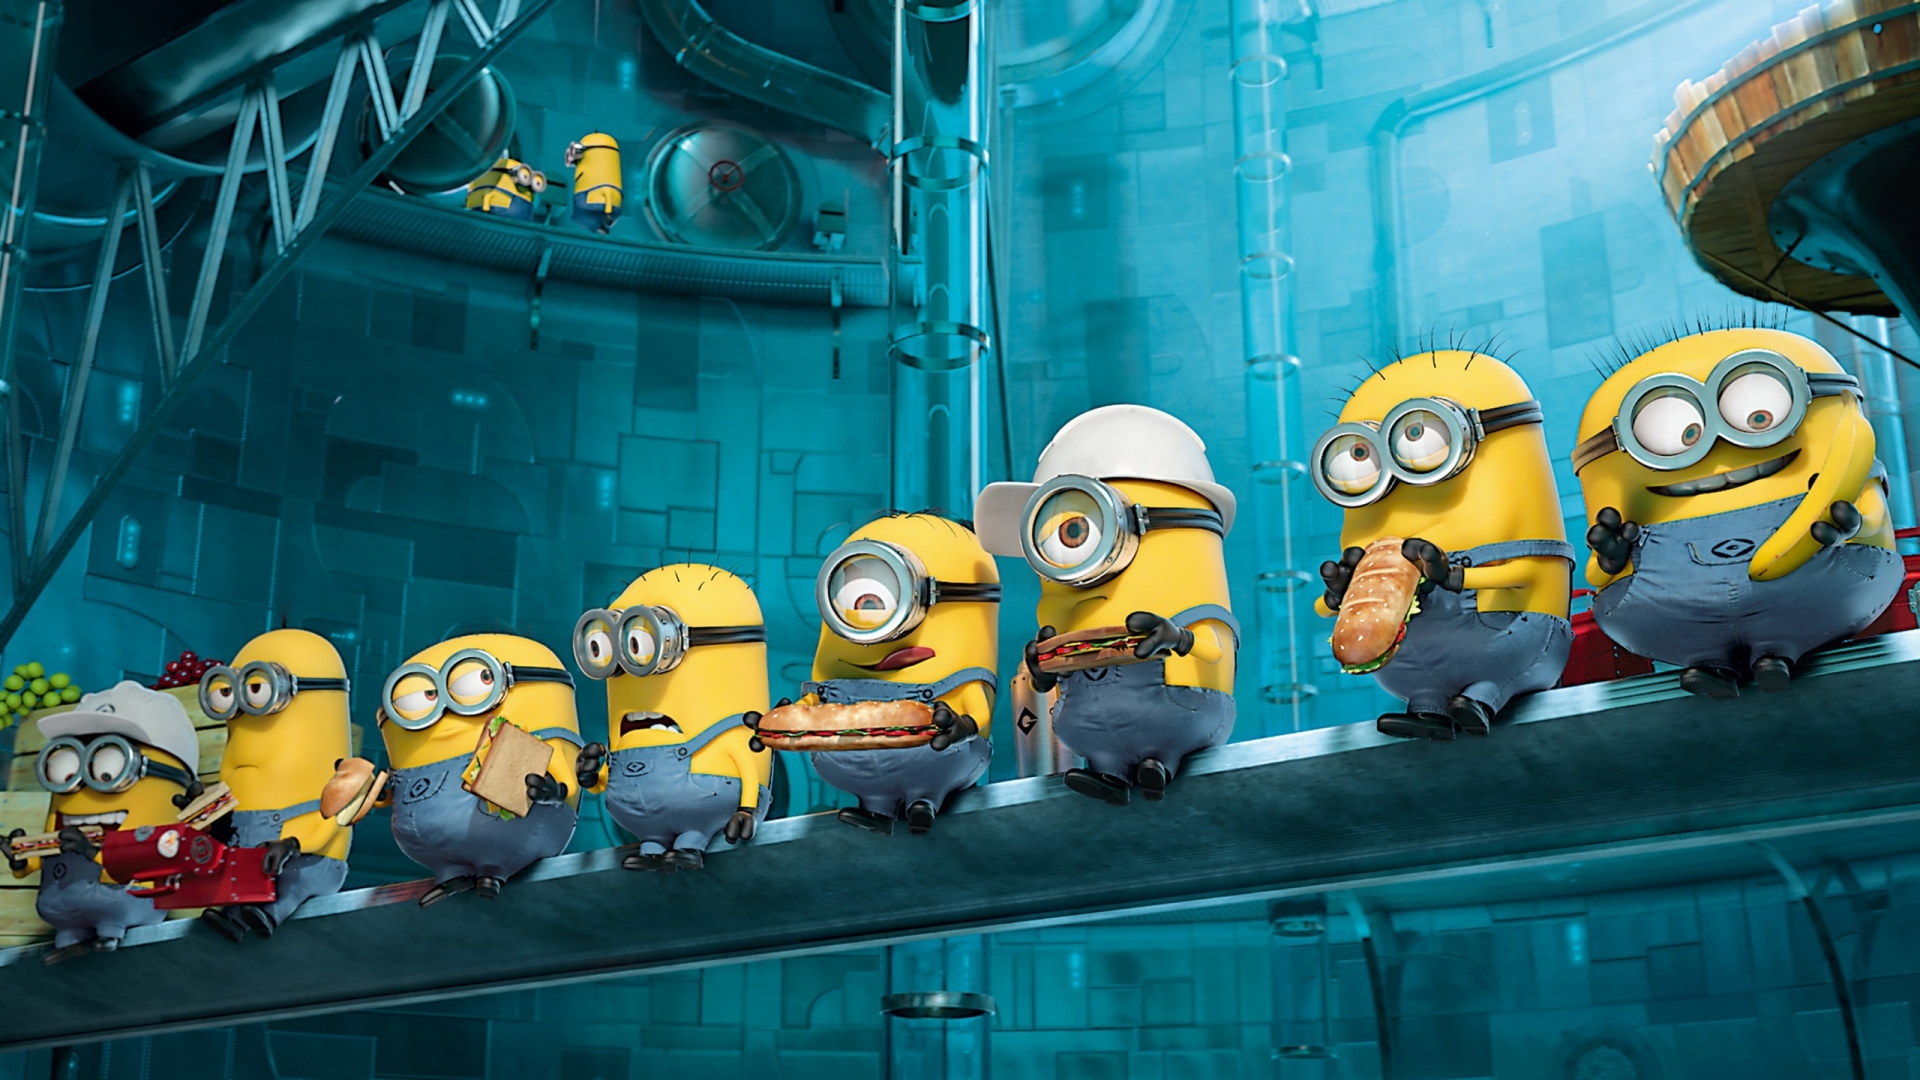 2013 Despicable Me Minions for 1920 x 1080 HDTV 1080p resolution